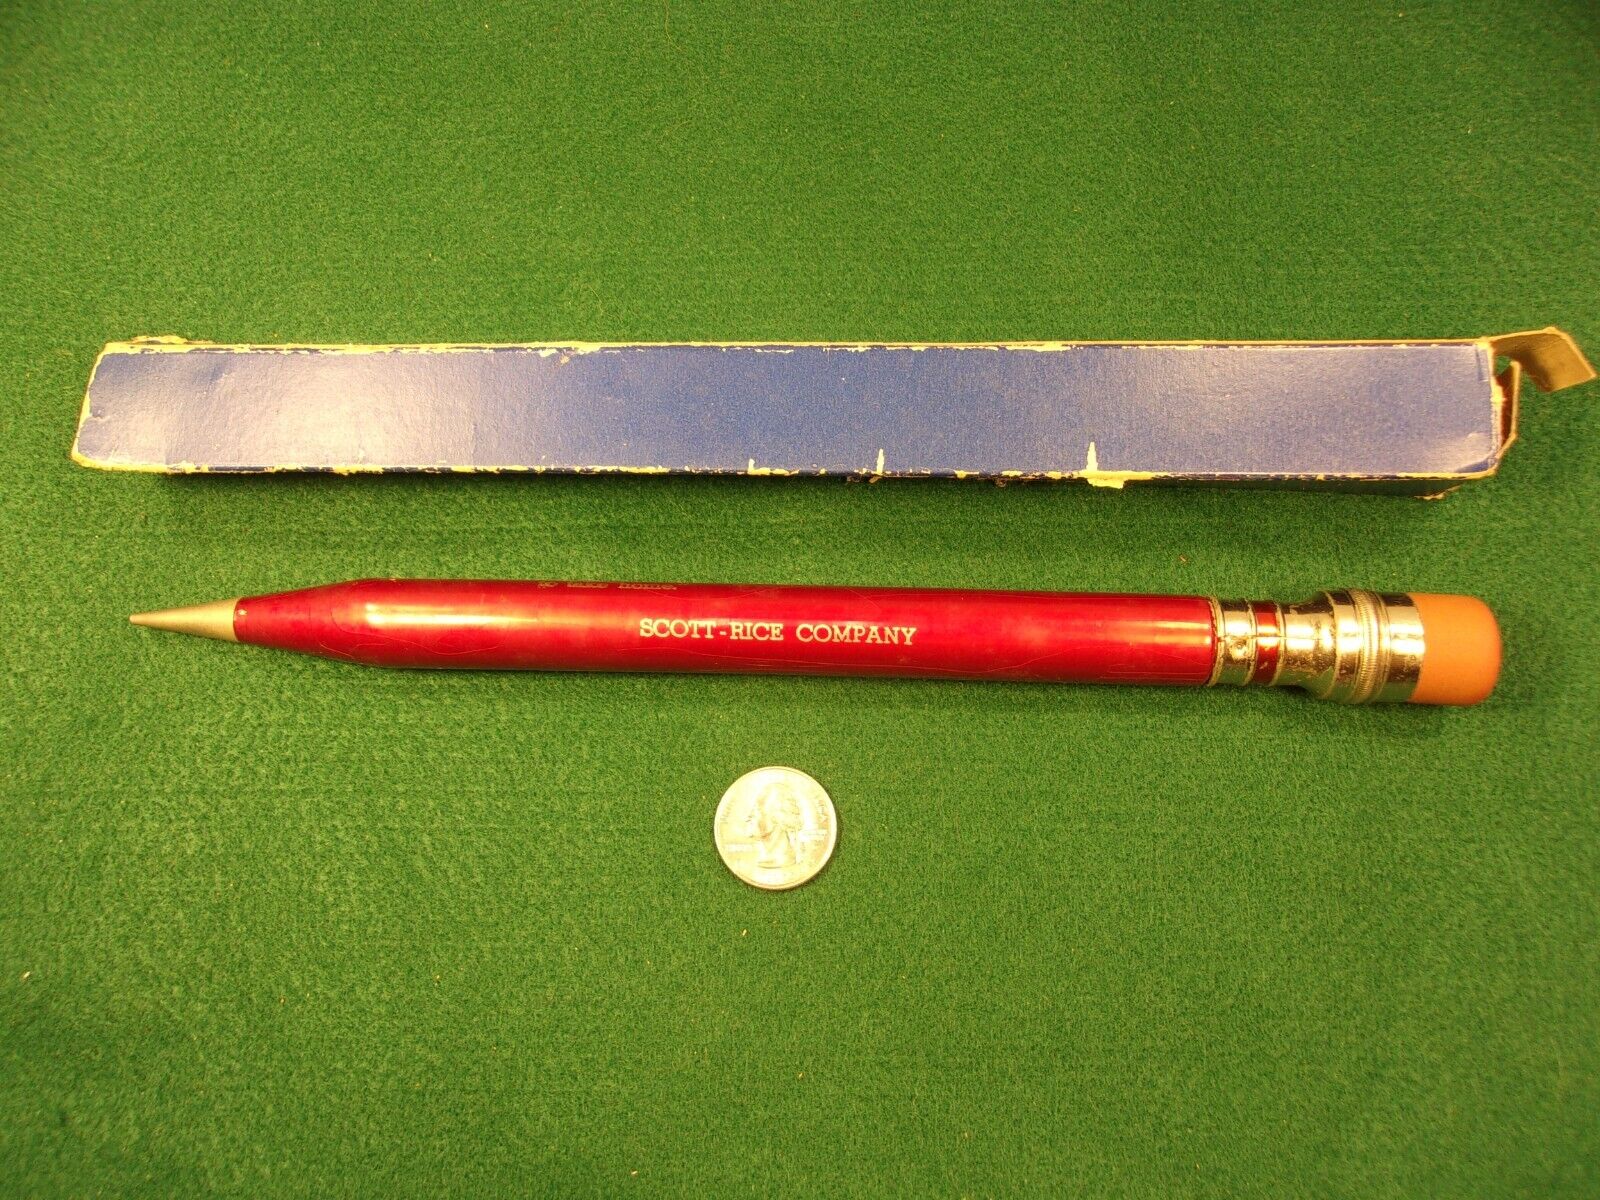 EXTREMELY LARGE OLD VTG MECHANICAL PENCIL (HUMEROUS POEM):  SCOTT-RICE COMPANY